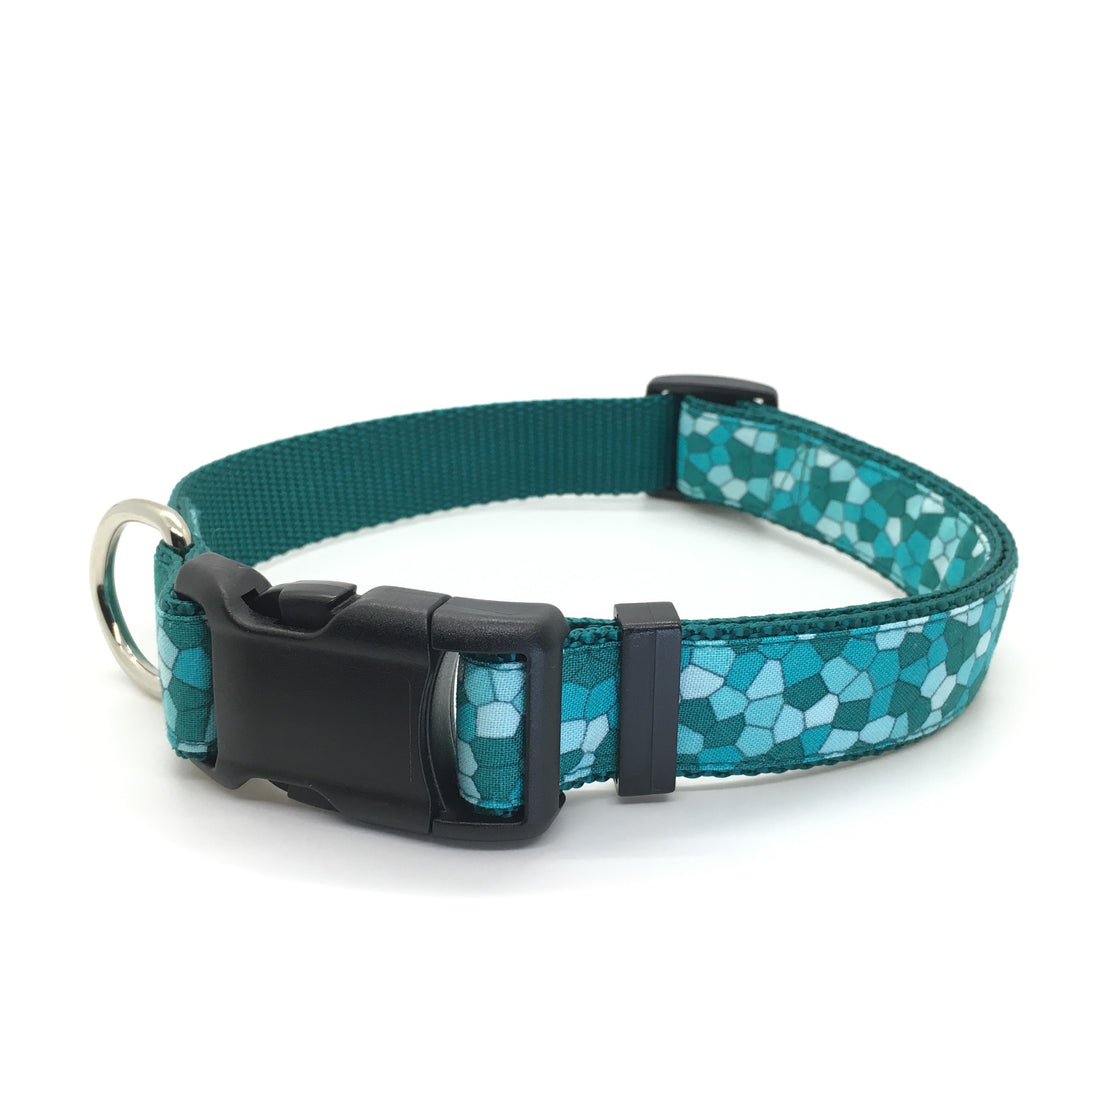 Persnickety Pets: Dragon scales classic dog collar, single